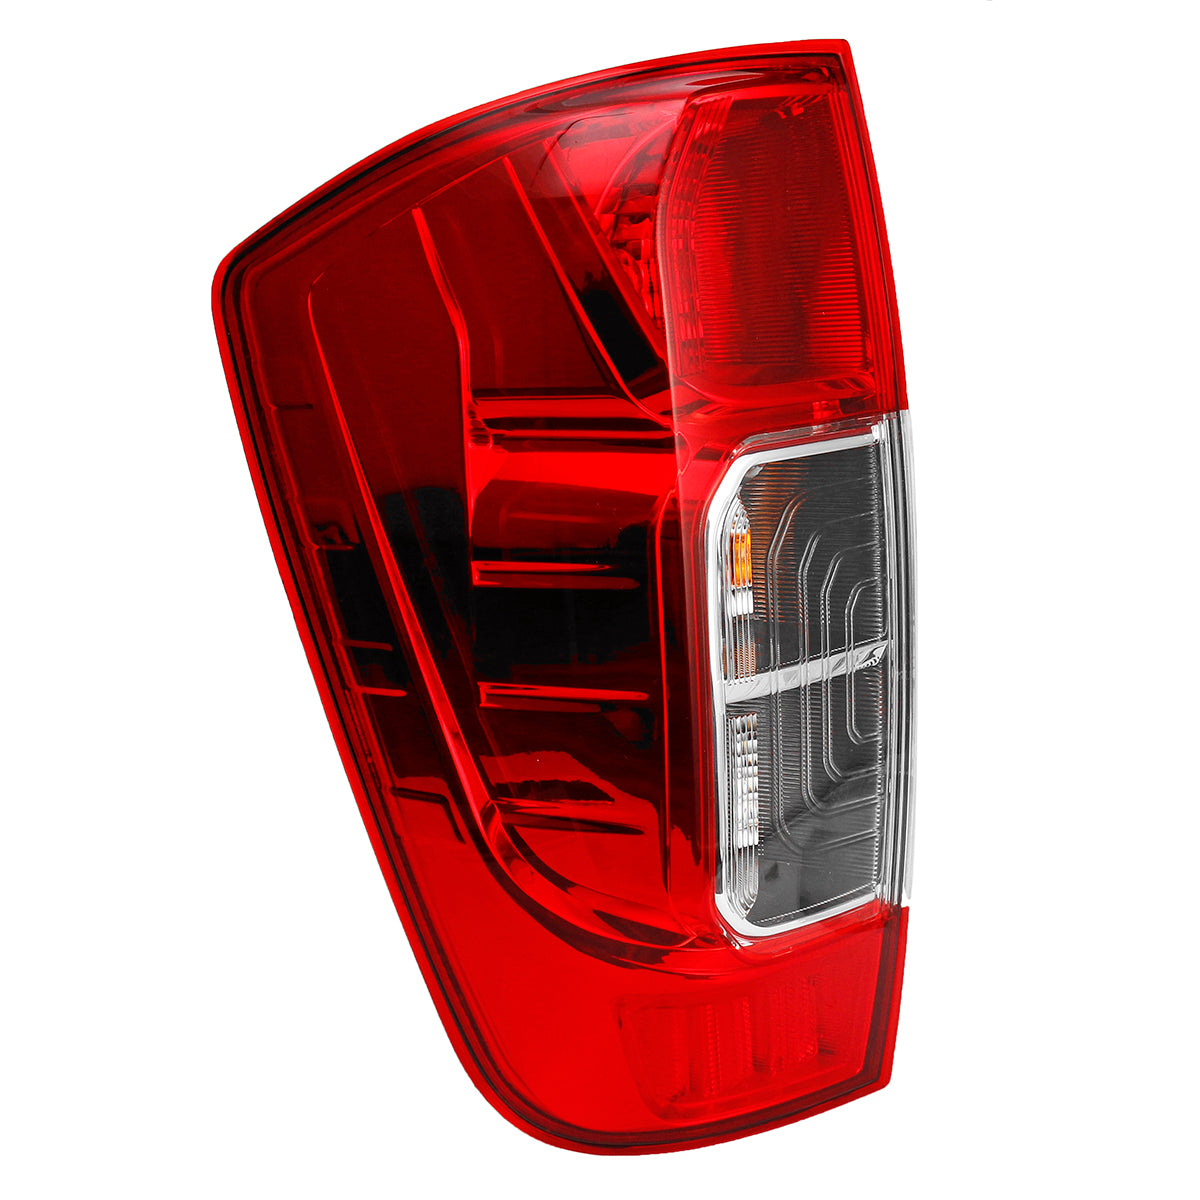 Firebrick Car Rear Tail Light Red Left/Right with Bulb Wiring Harness for Nissan Navara NP300 D23 2015-2019